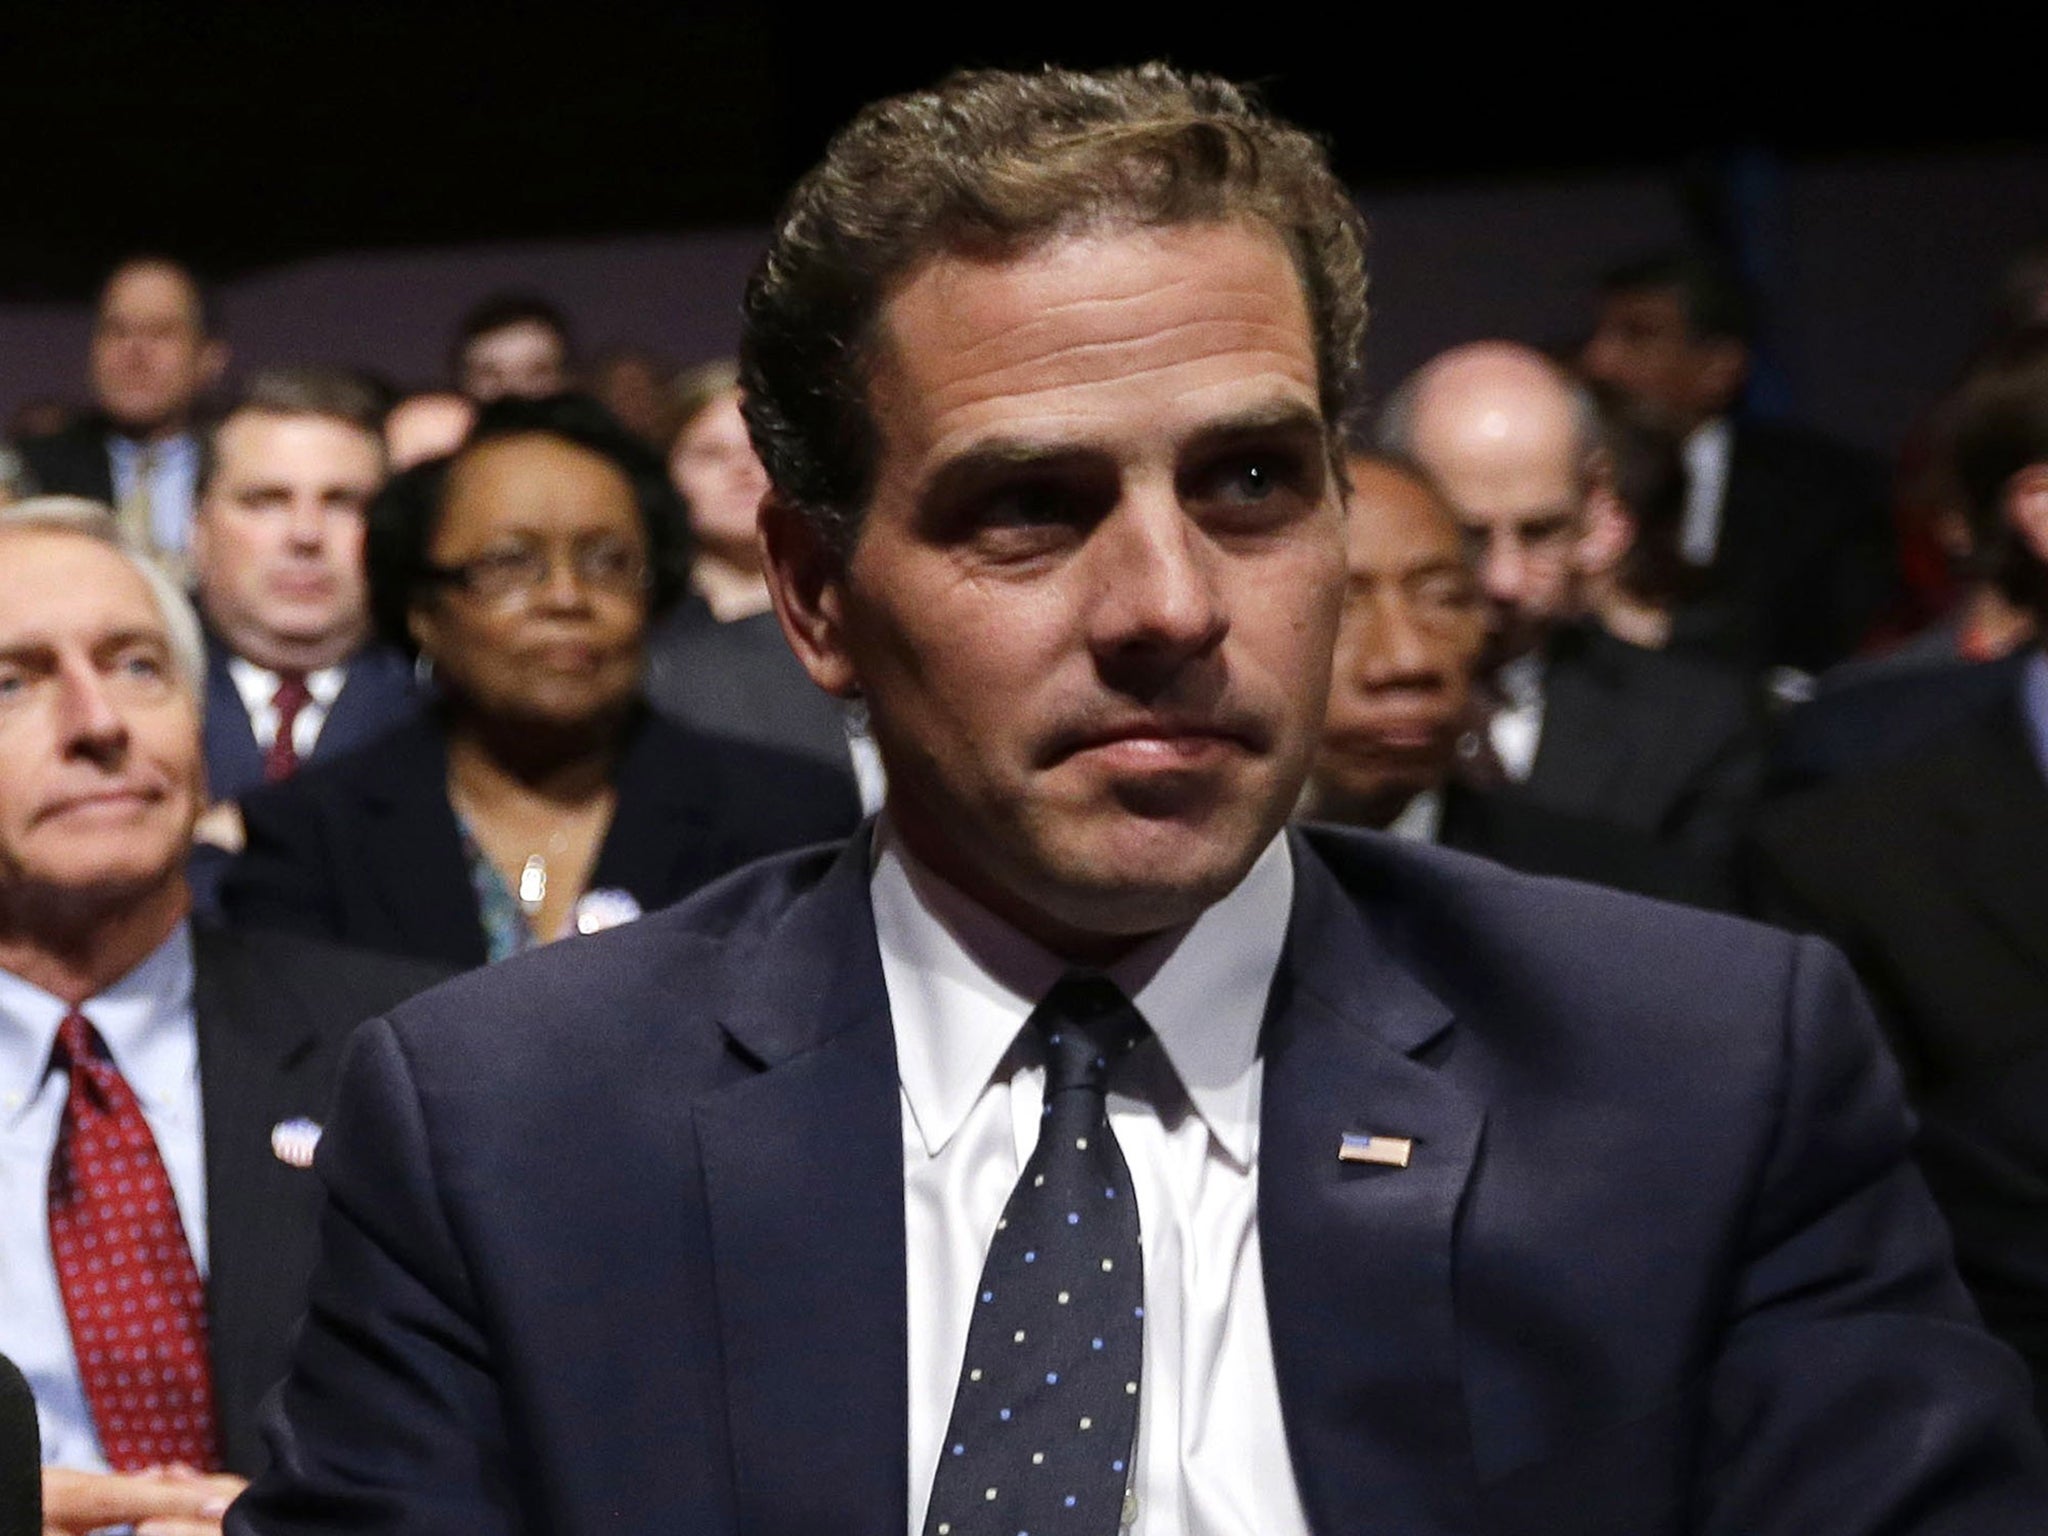 Hunter Biden joined the Navy Reserve at the age of 42